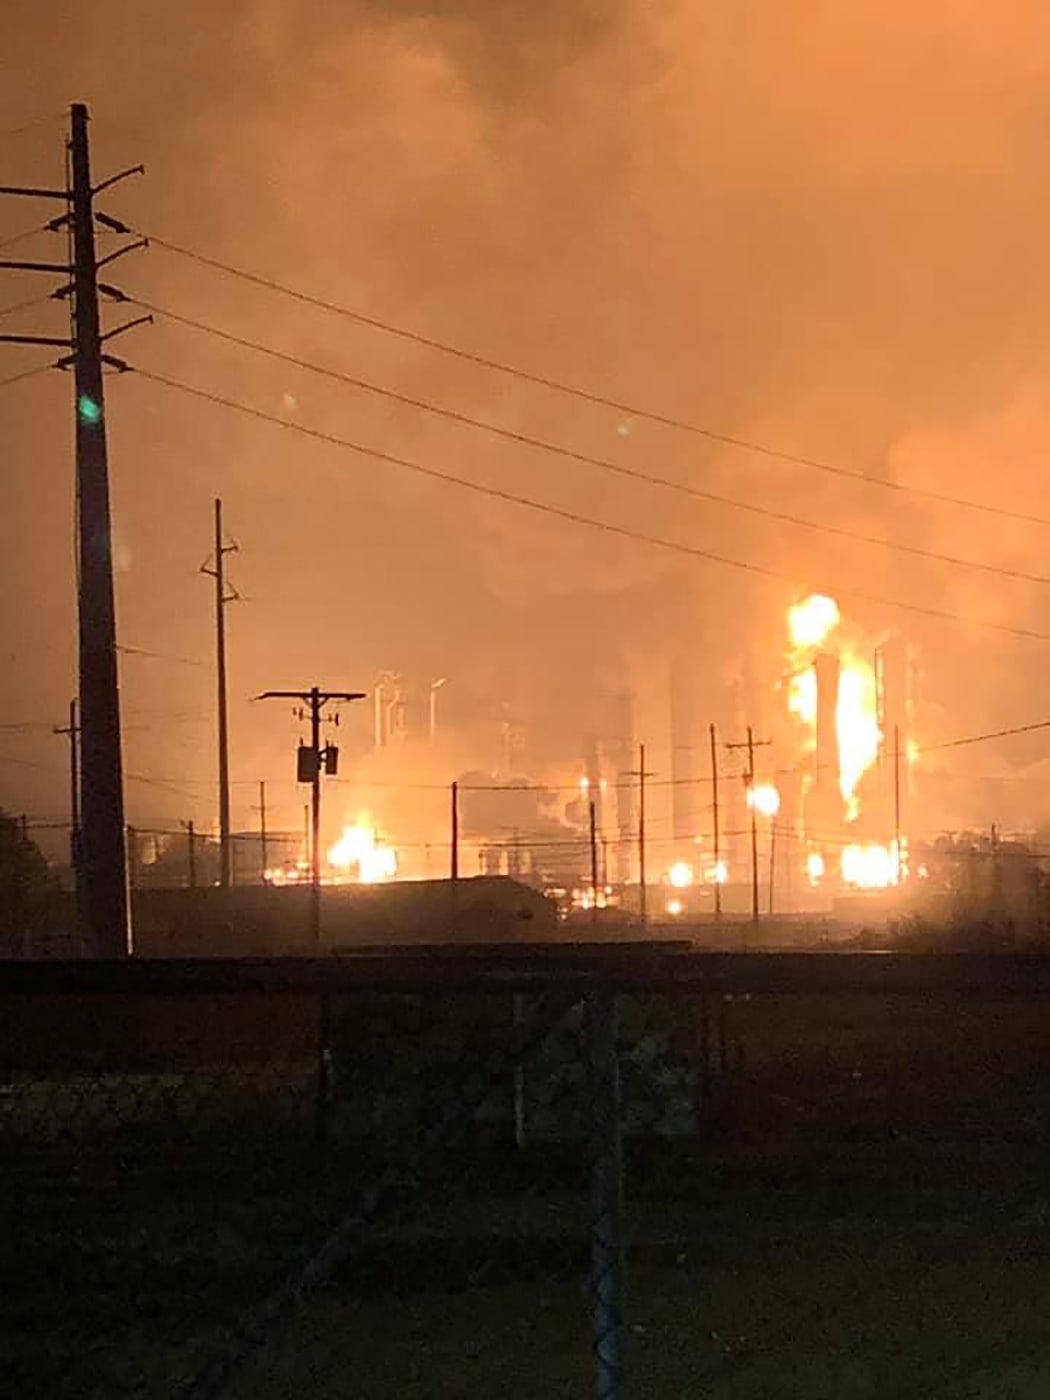 This handout image taken early on November 27, 2019 and released to AFP by Ryan Mathewson, who lives roughly two minutes from the plant with his family, shows fire and flames following an explosion at a chemical plant in the Texas city of Port Neches, east of Houston.